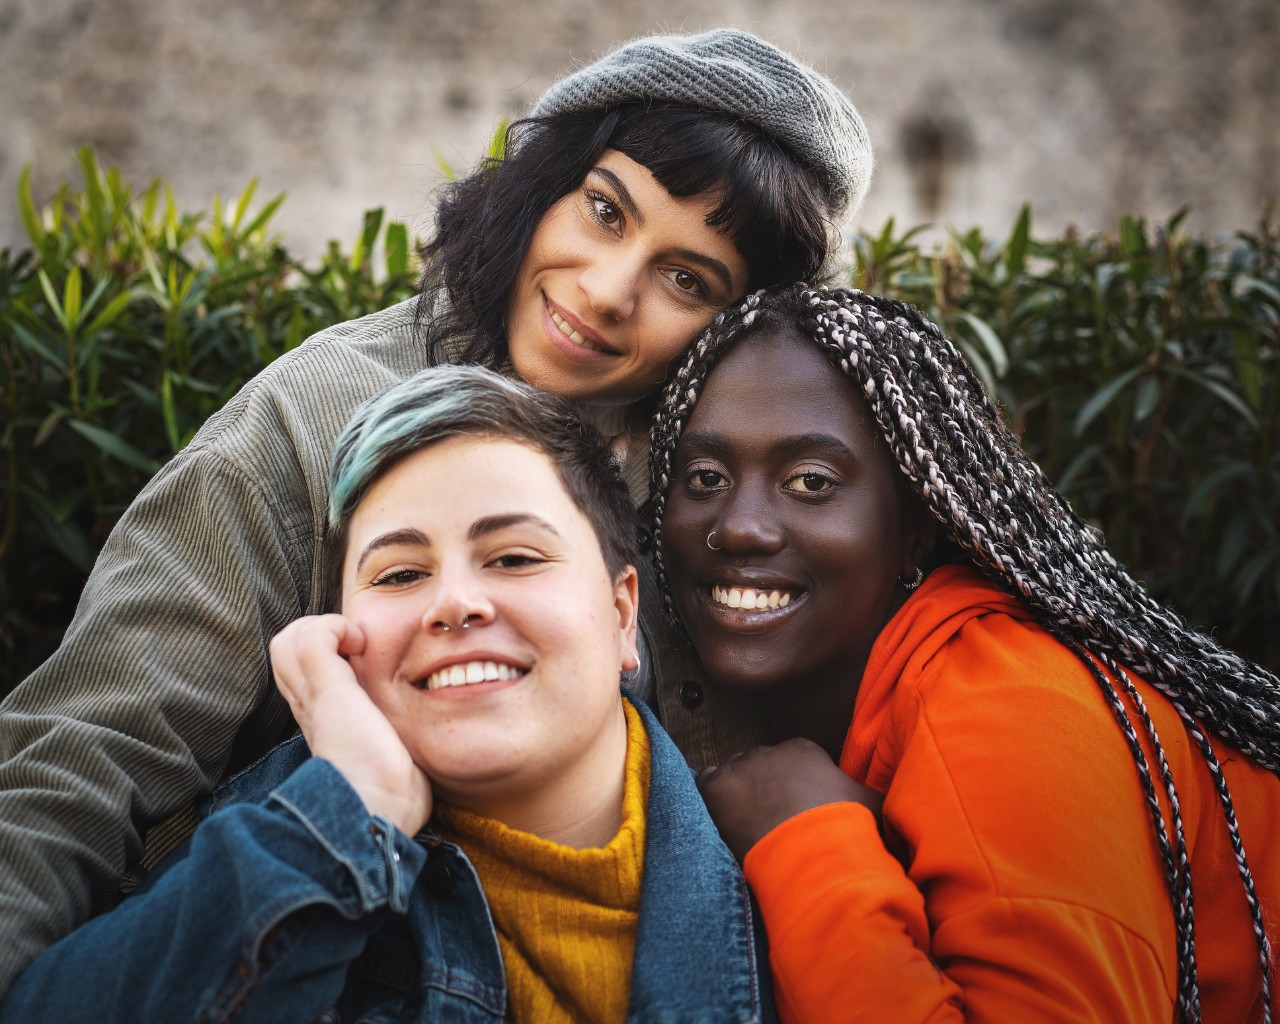 Portrait of multiracial diverse young woman smiling and looking at the camera.